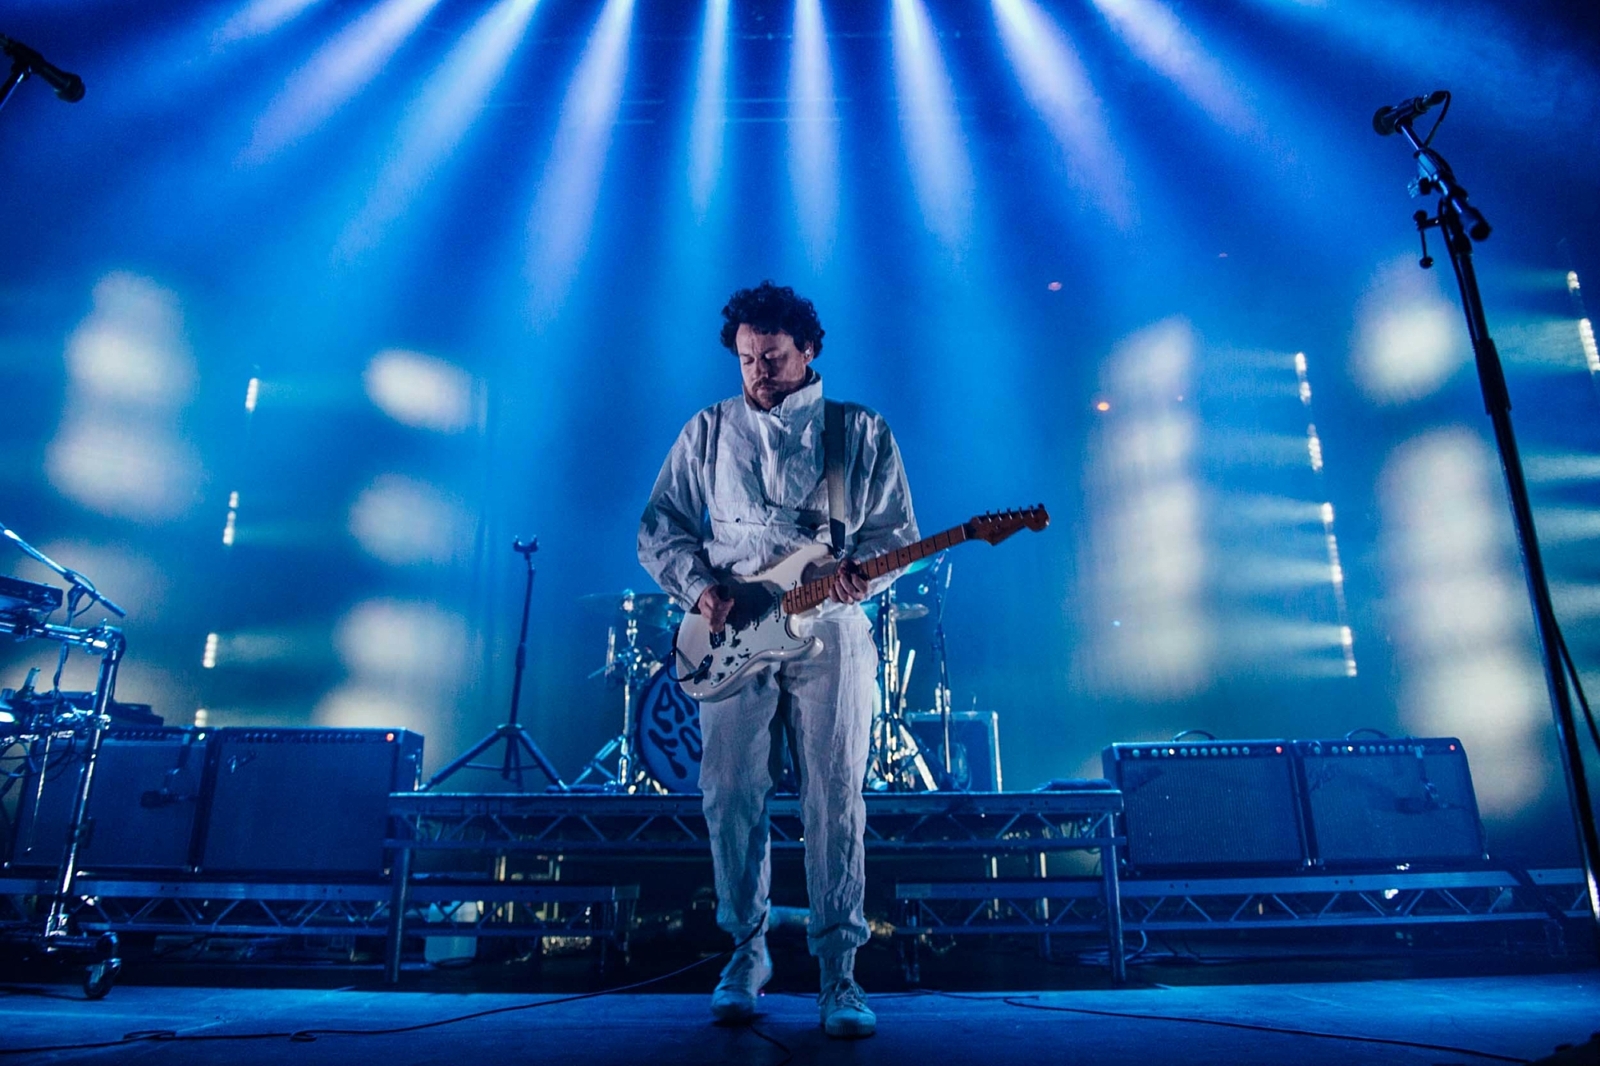 Metronomy to play exclusive album launch show at Pitchfork Music Festival London